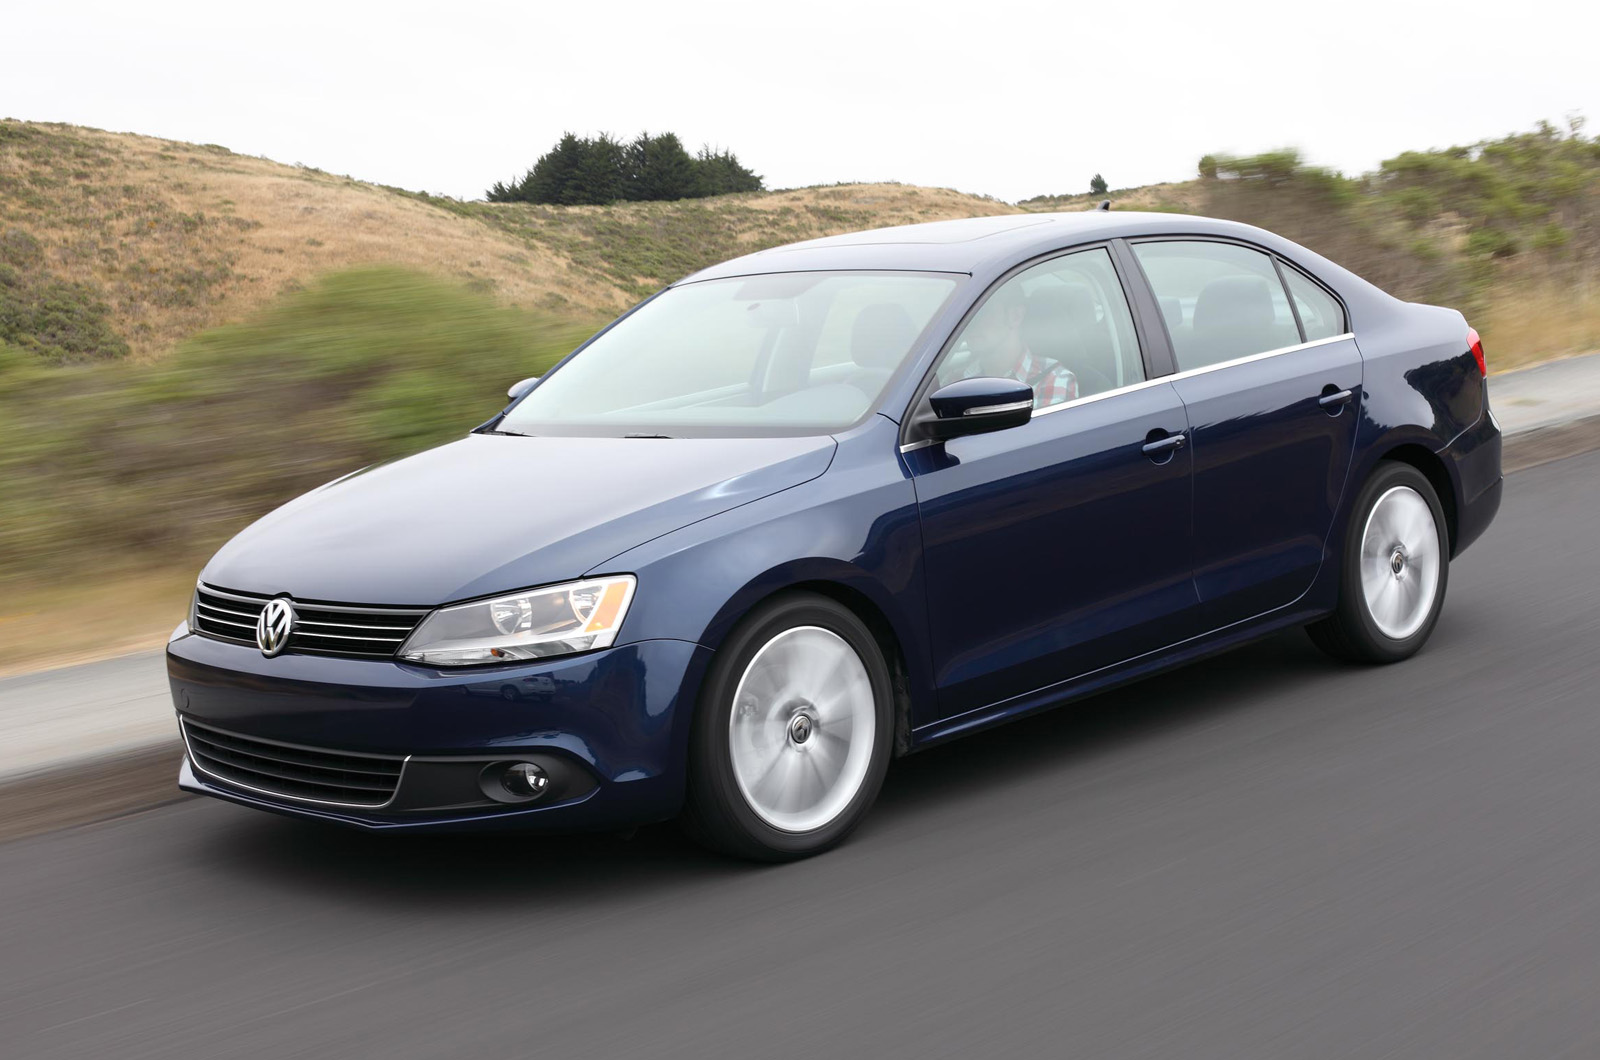 Introduce 127+ images is a volkswagen jetta a good car - In ...